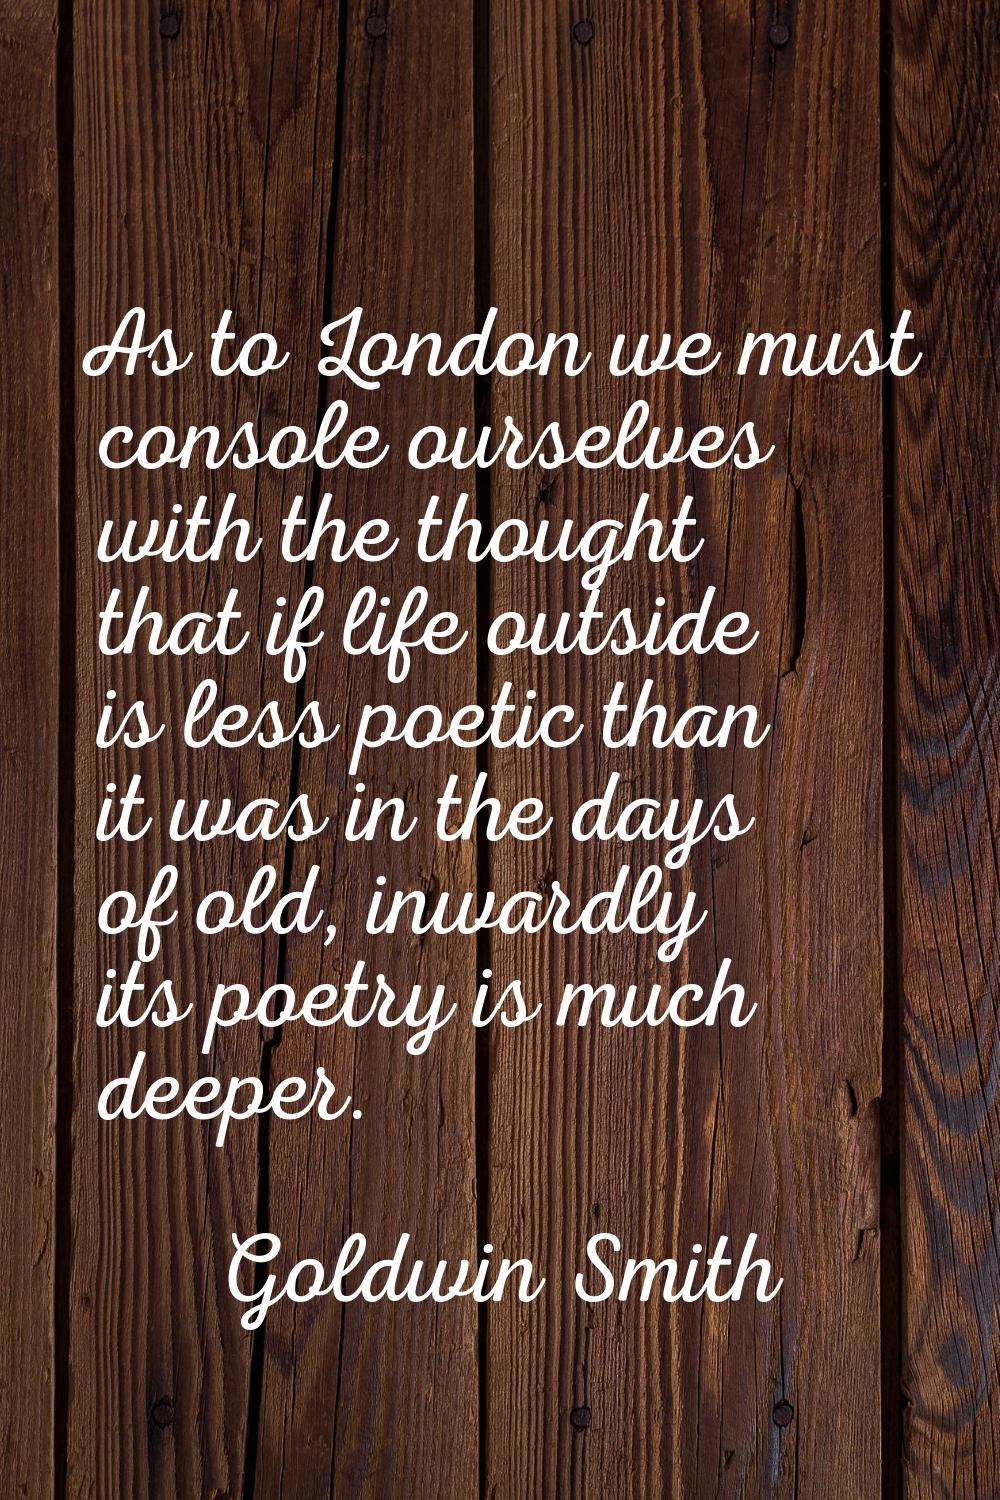 As to London we must console ourselves with the thought that if life outside is less poetic than it